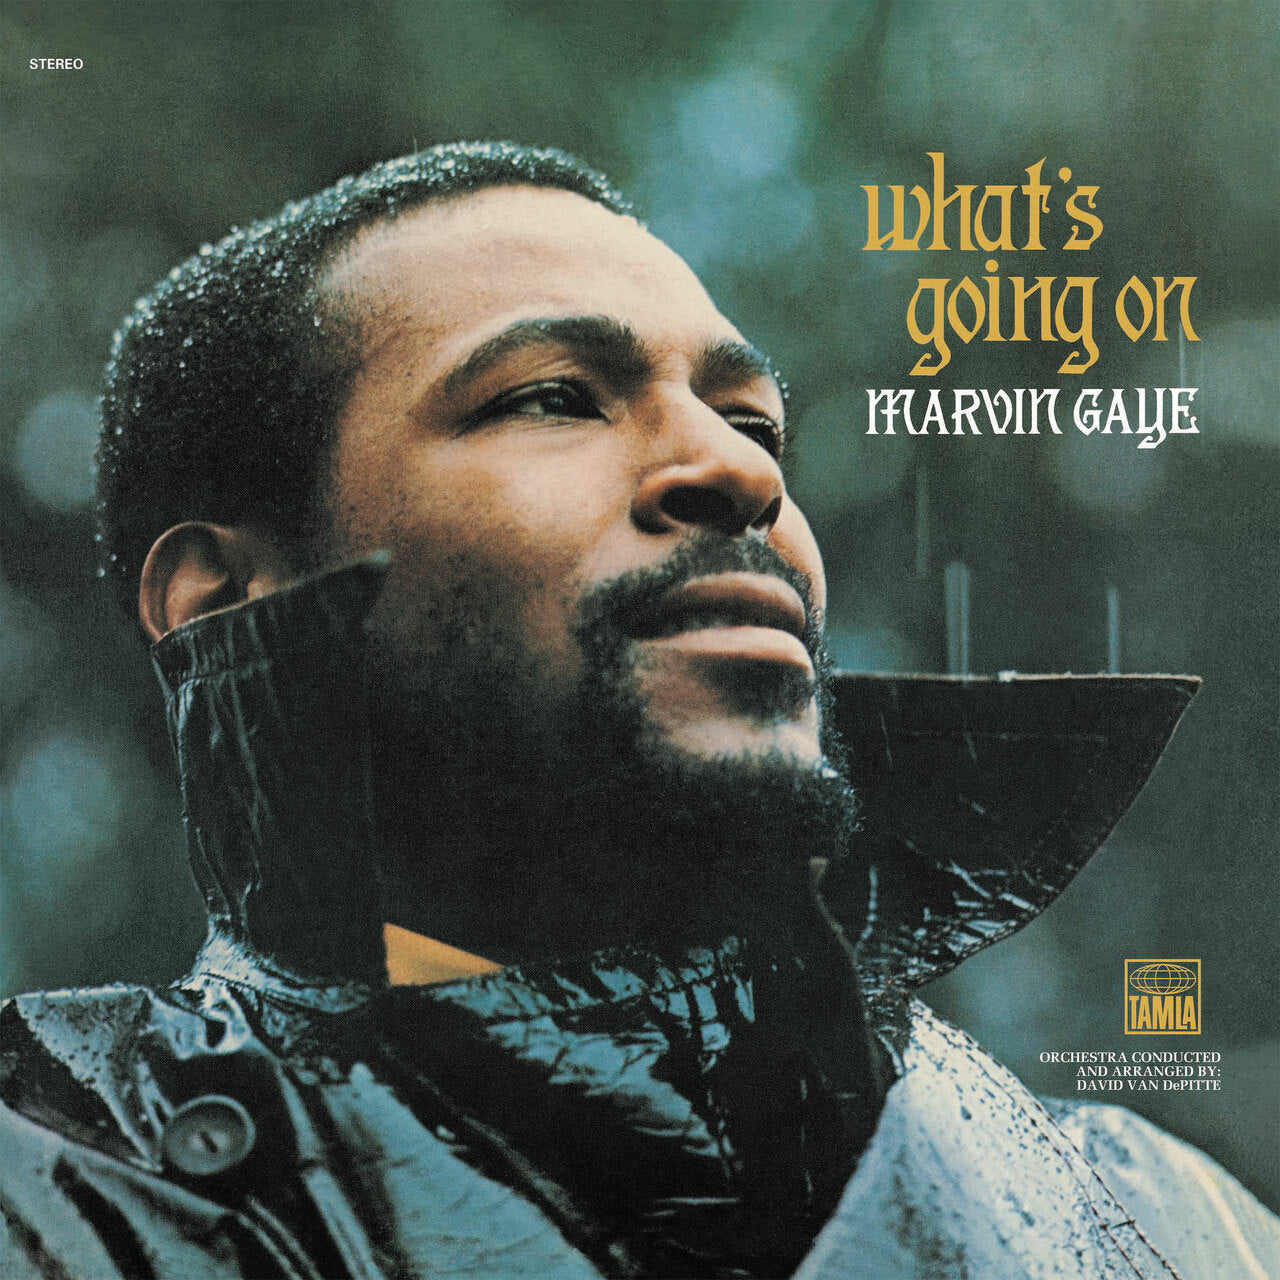 MARVIN GAYE - WHAT'S GOING ON - 50TH ANNIVERSARY 2-LP EDITION - VINYL LP